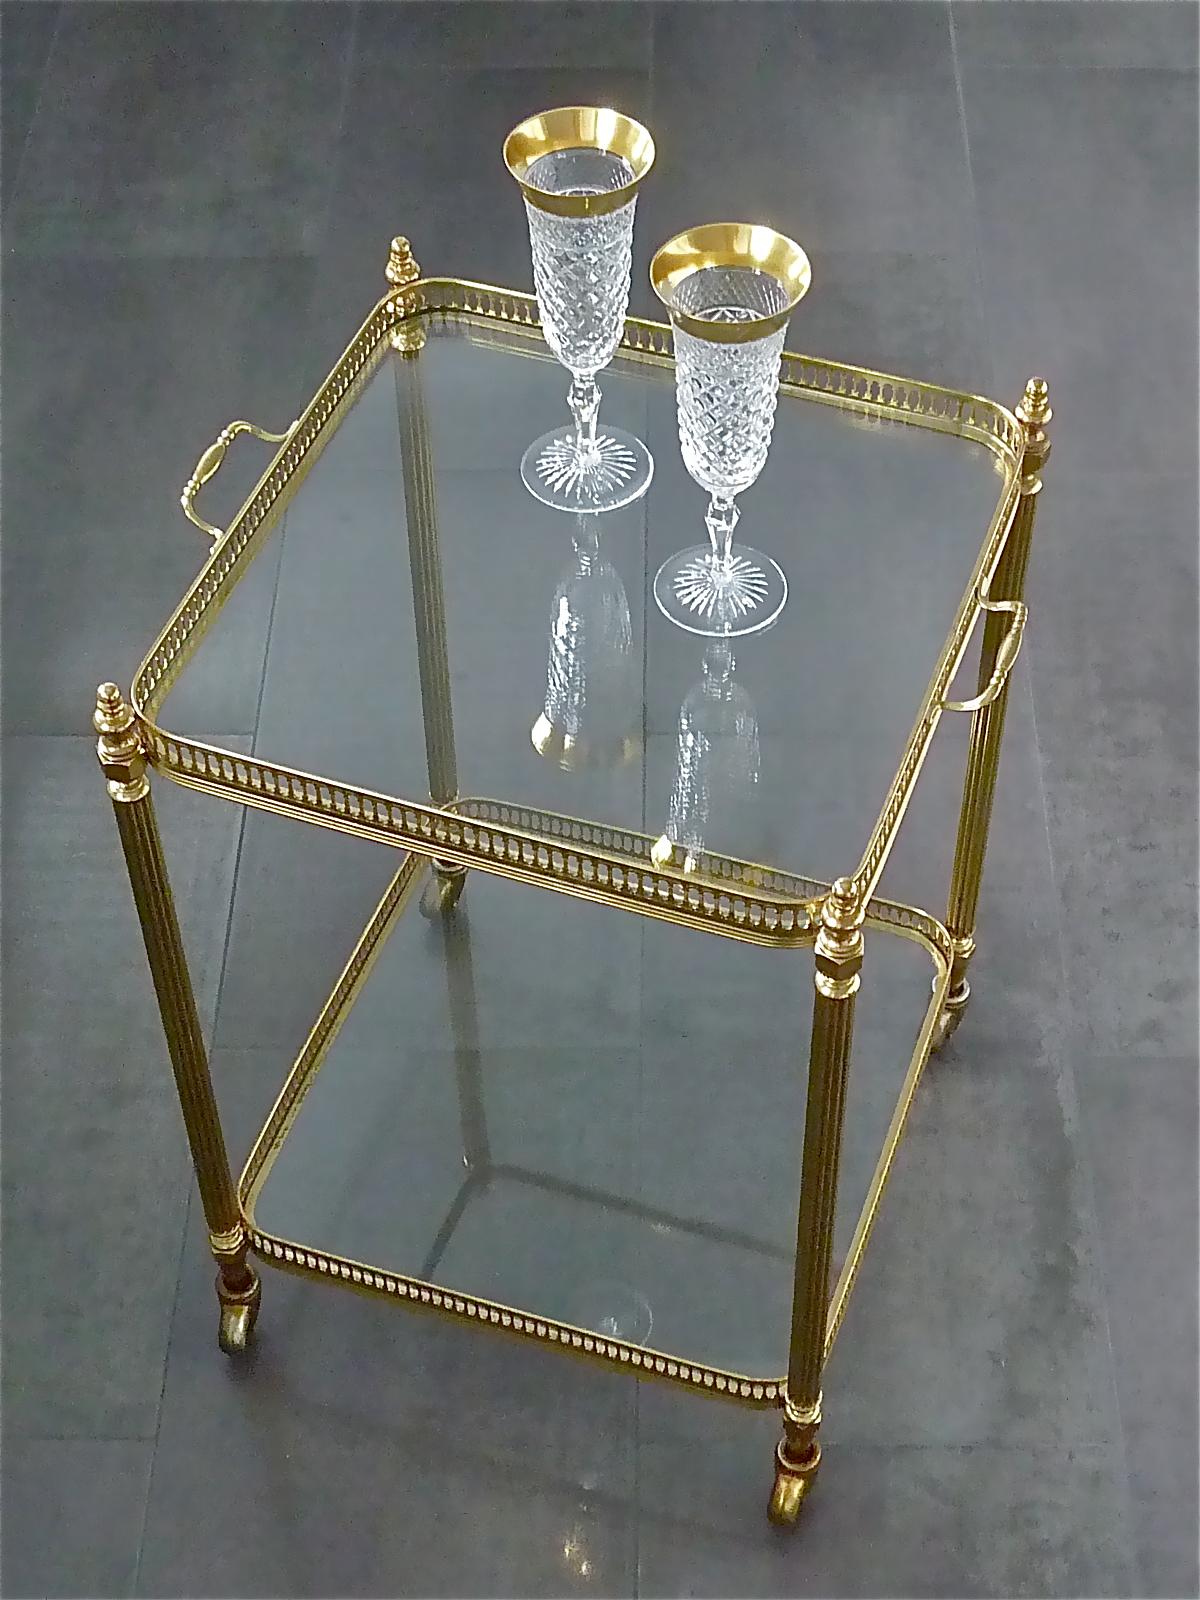 Amazing vintage bar cart, drinks serving trolley or side table on four small wheels made by Maison Baguès Paris, France, circa 1950. It is made of patinated brass with overall nice details, brass metal and clear slightly green tinted glass. It has